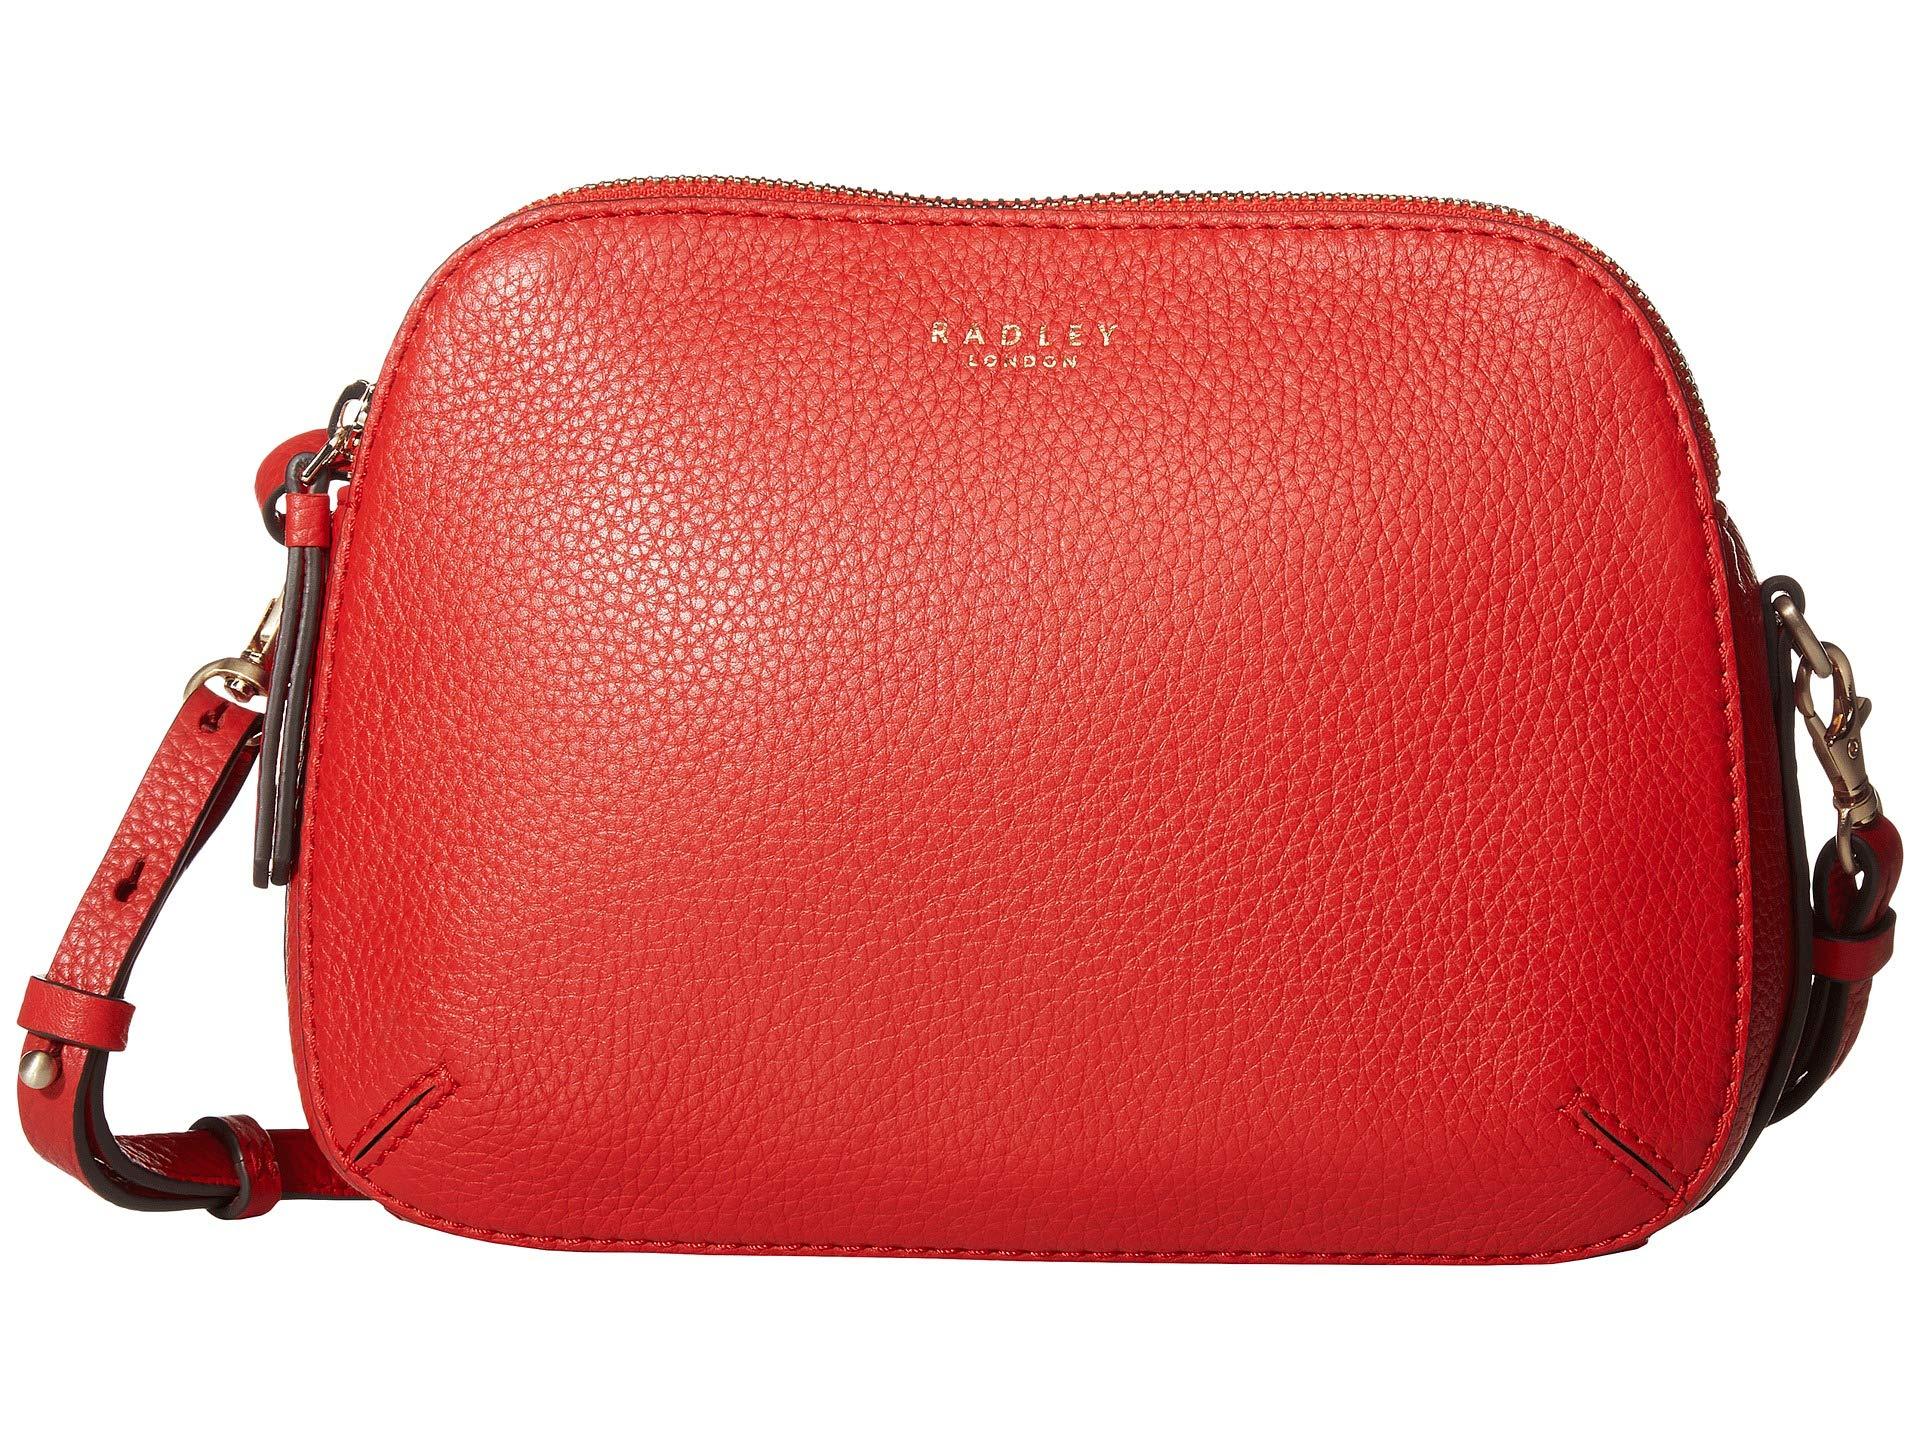 Radley Leather Dukes Place - Medium Zip Top Crossbody in Red - Lyst